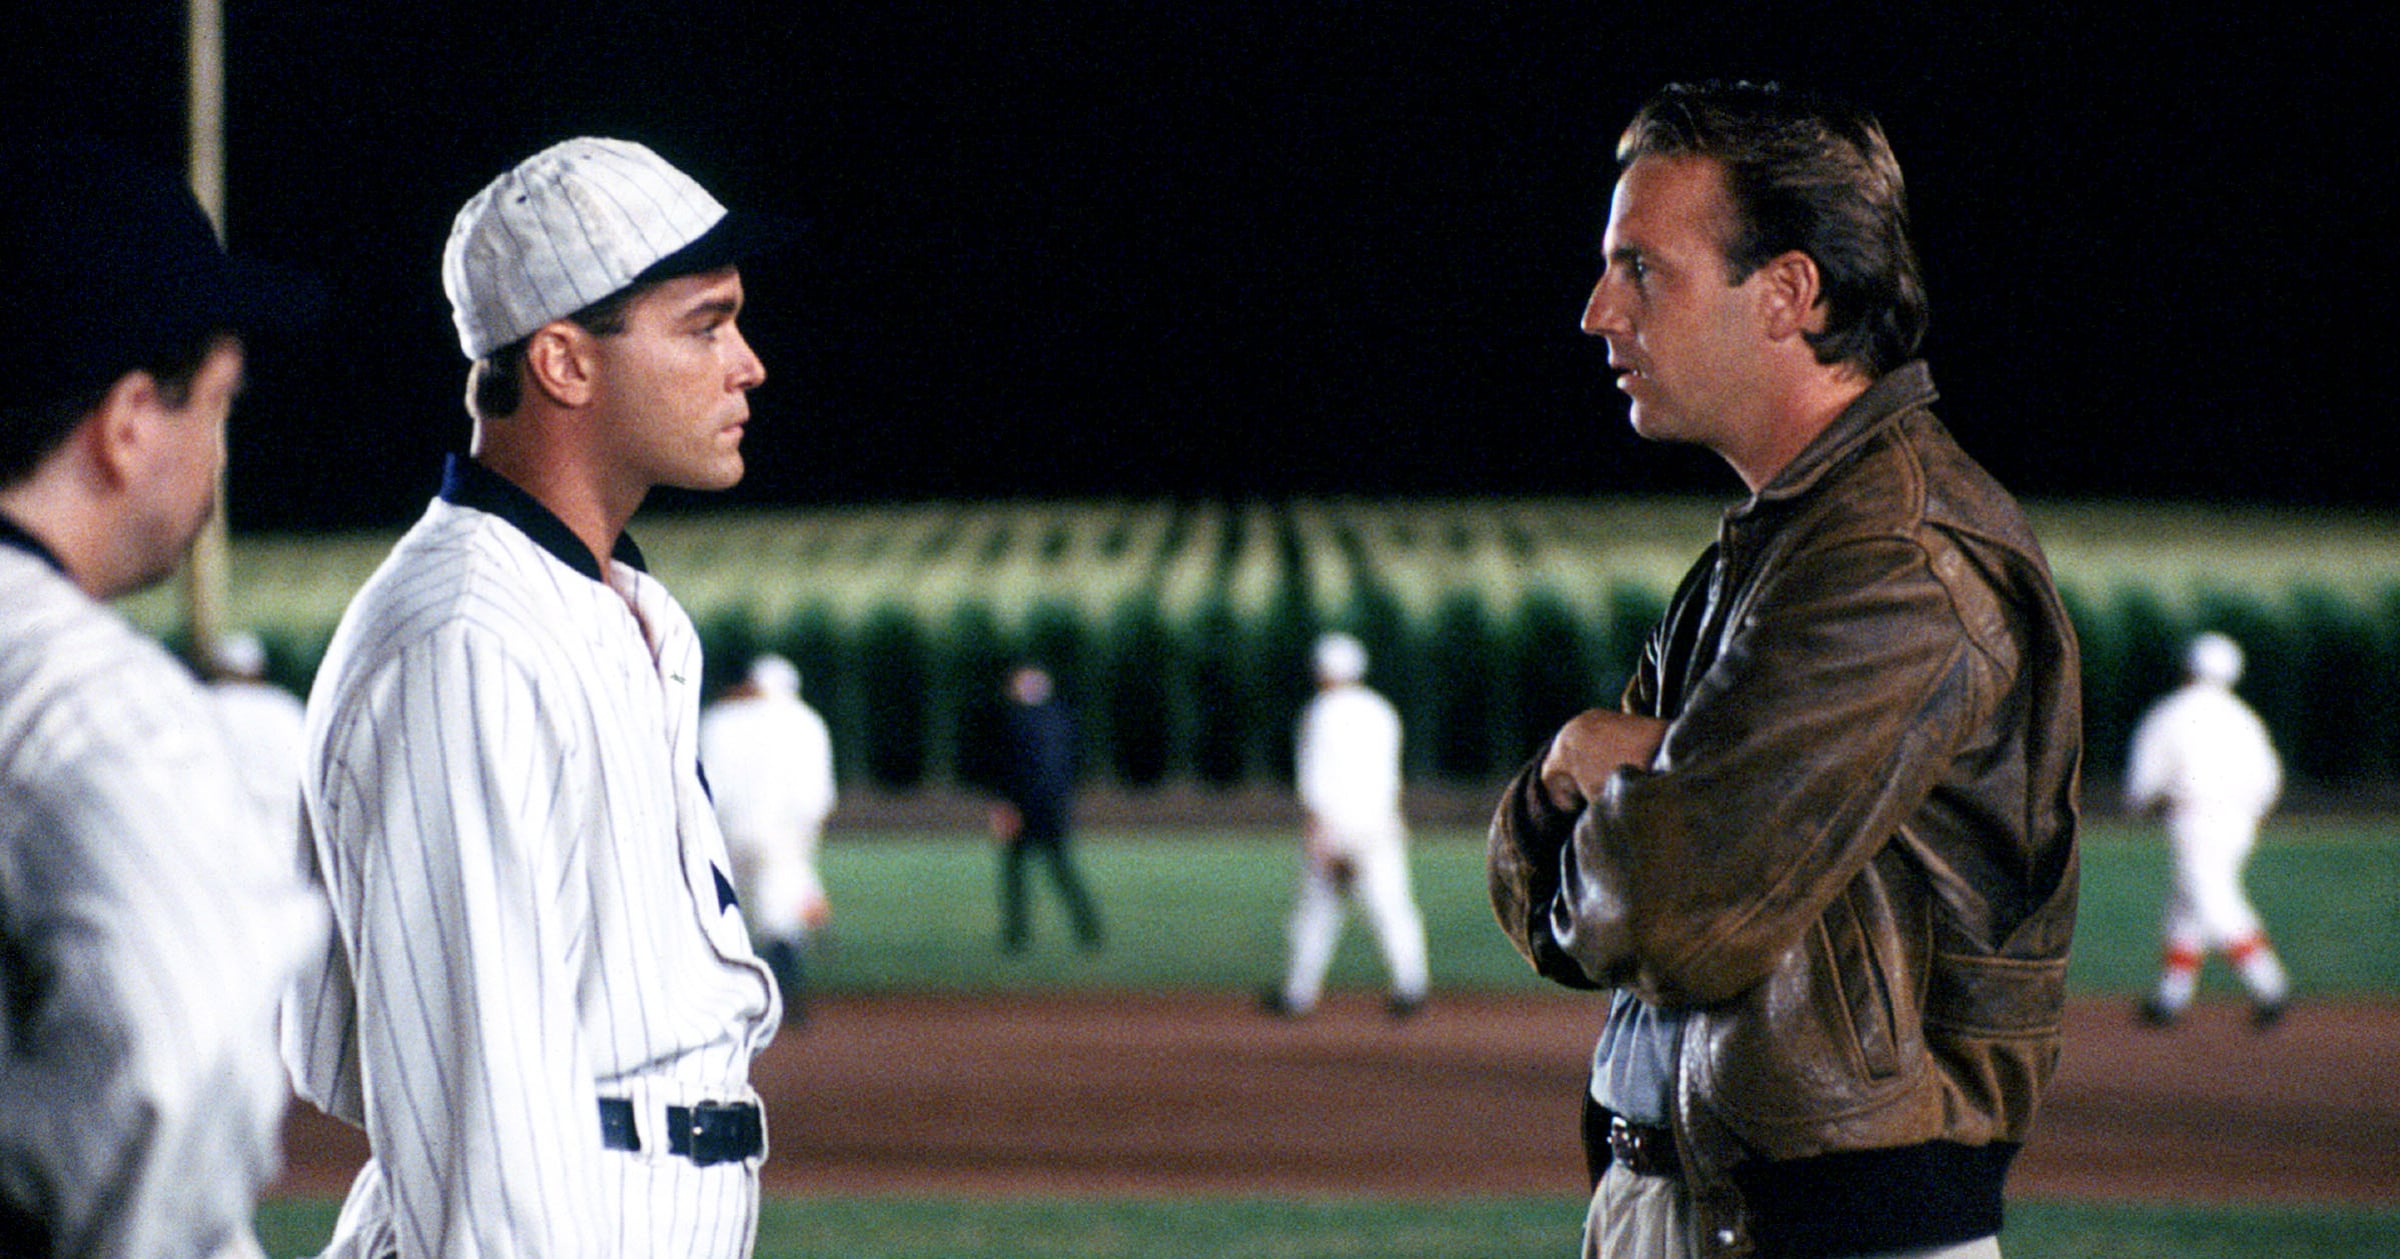 Reds and Cubs show off 'Field of Dreams' game throwback uniforms